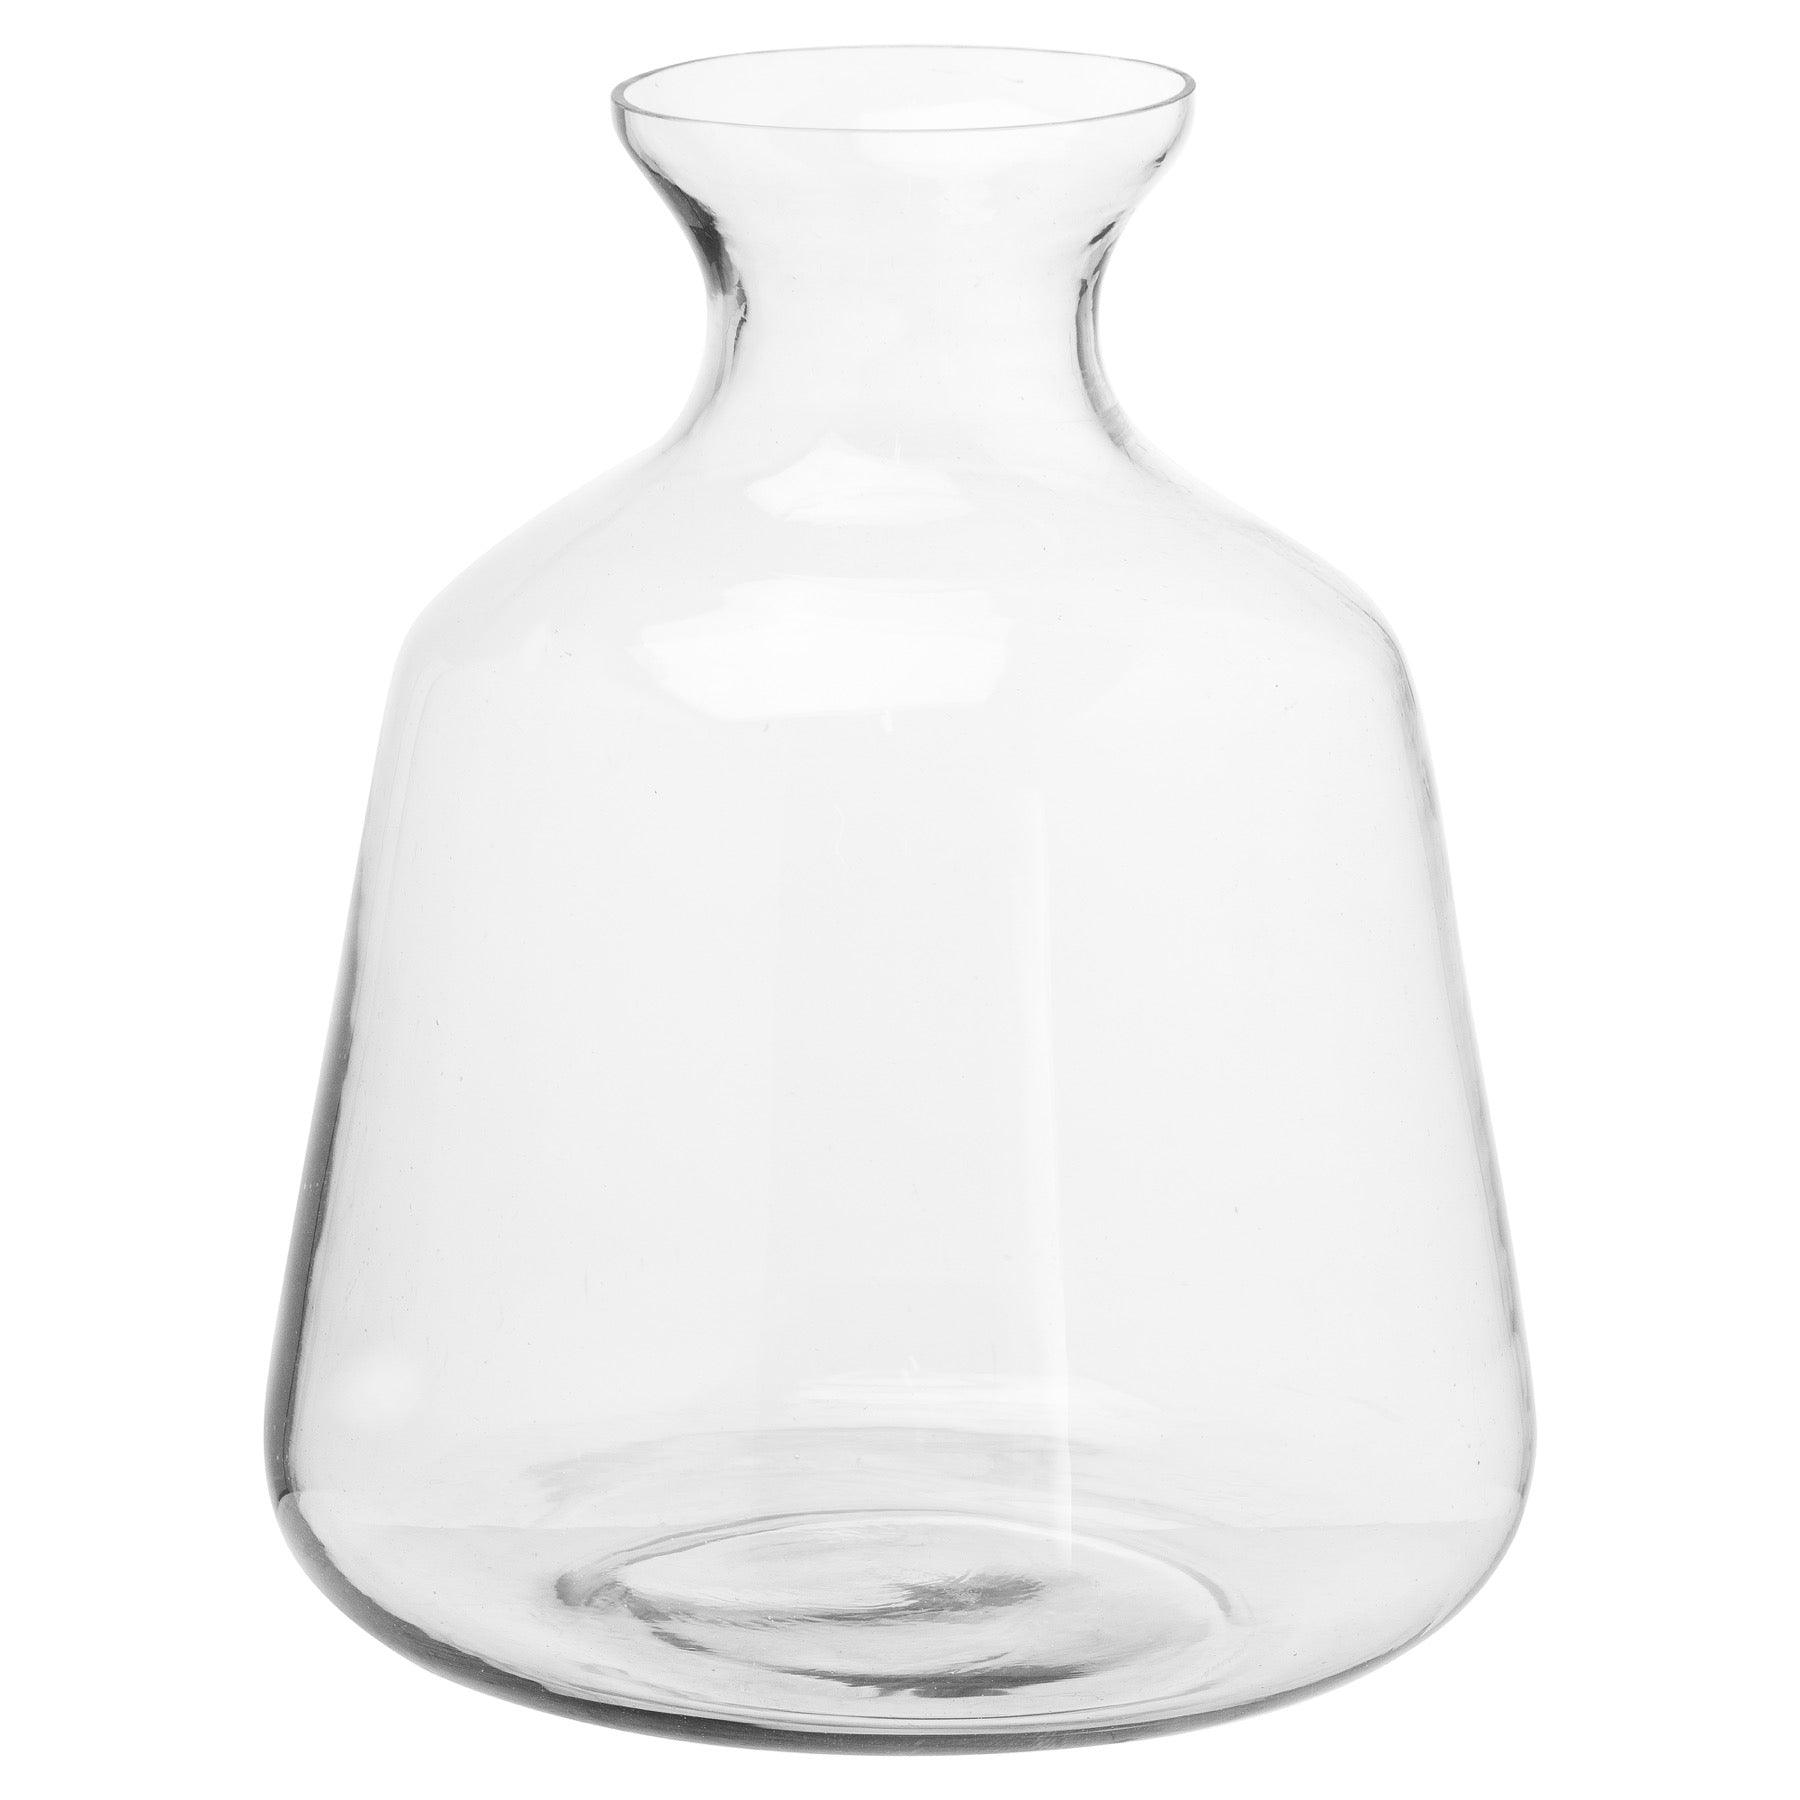 View Large Hydria Glass Vase information